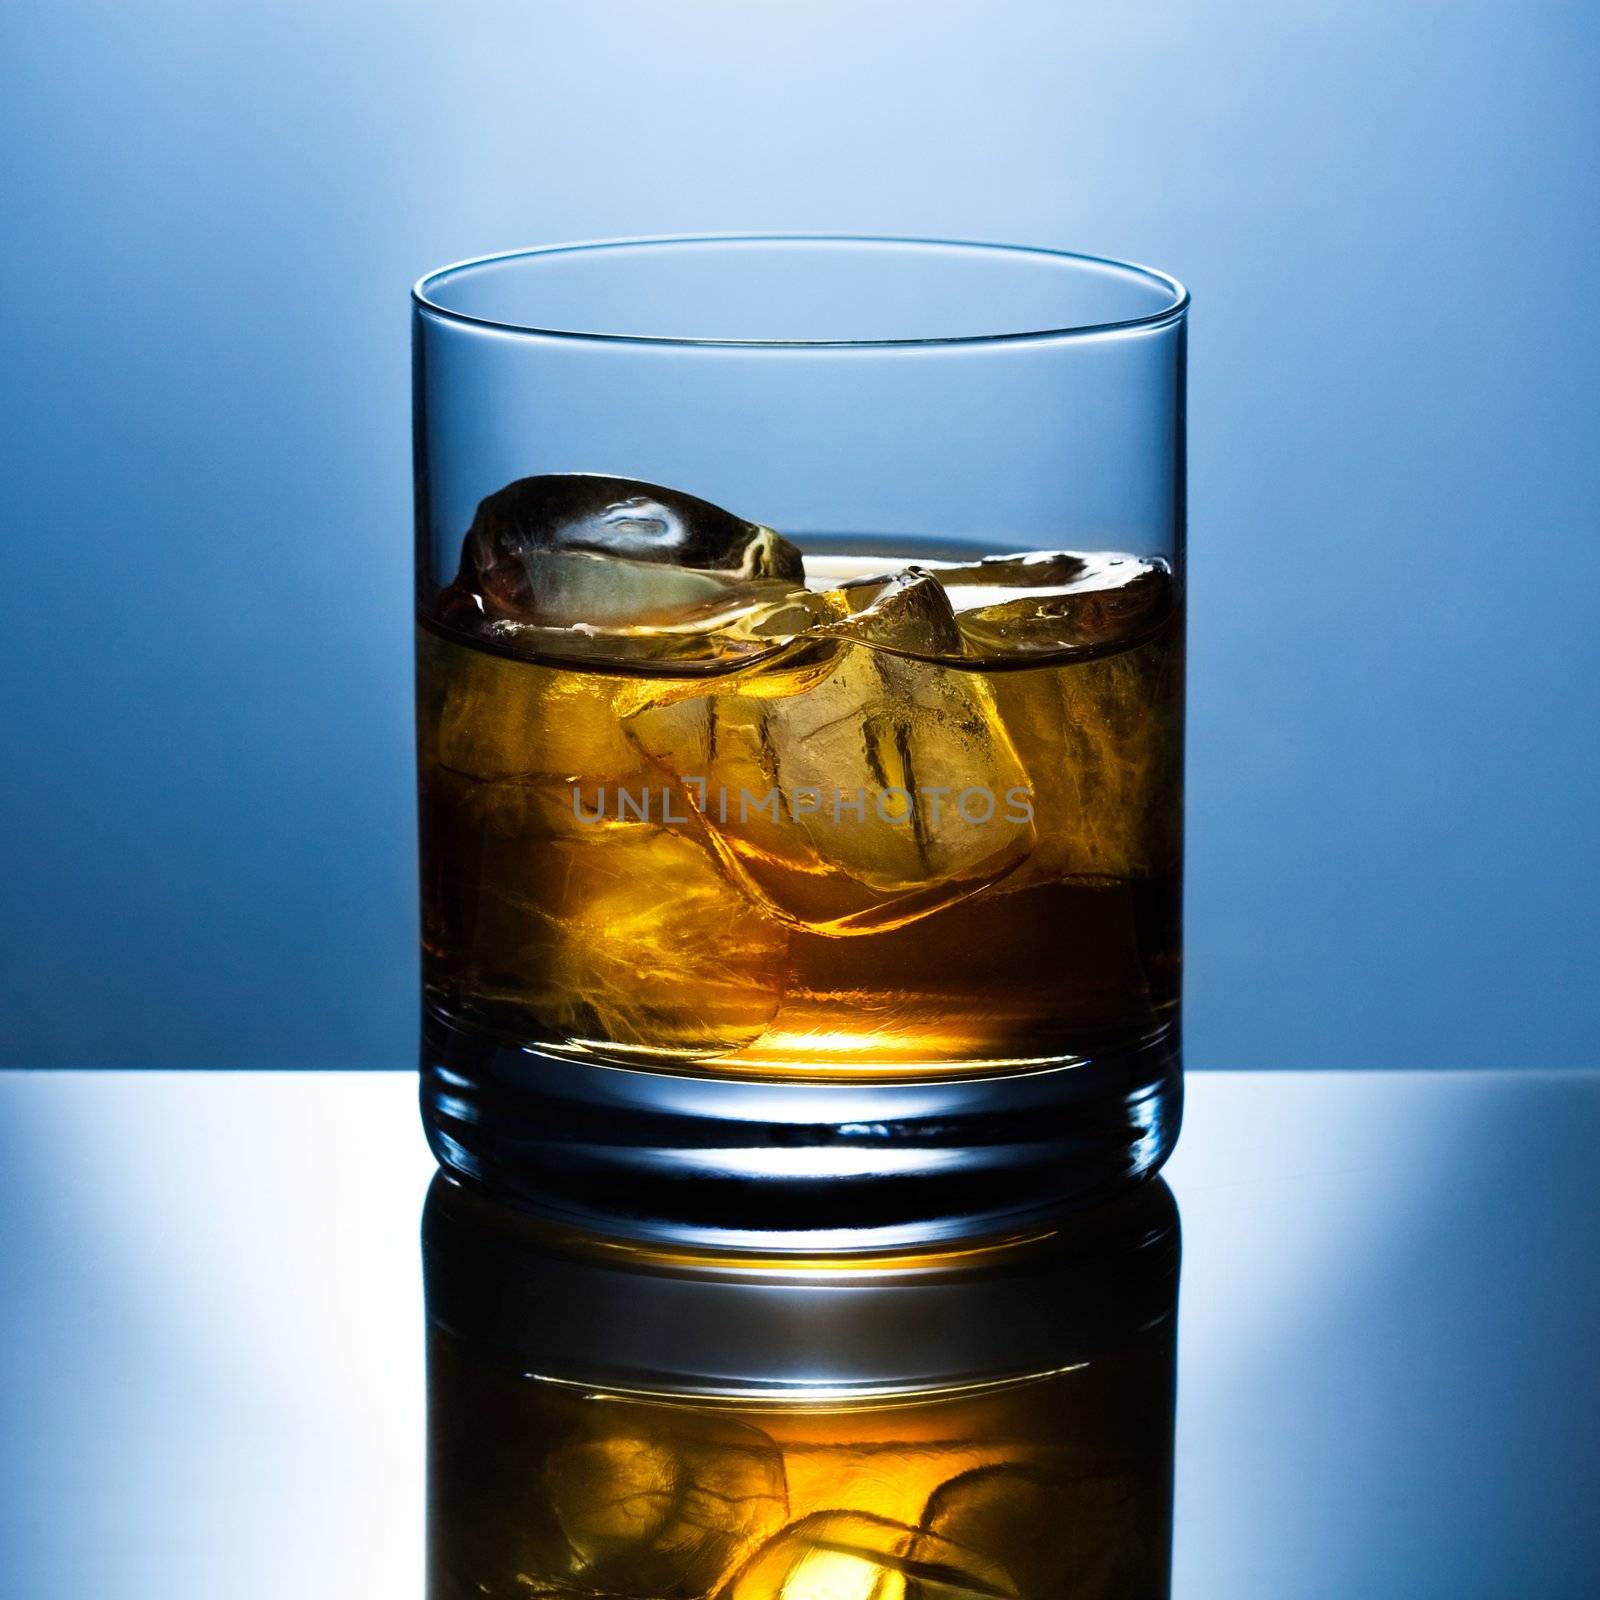 Beautifully shined glass from whisky with ice is reflected in a glass table
